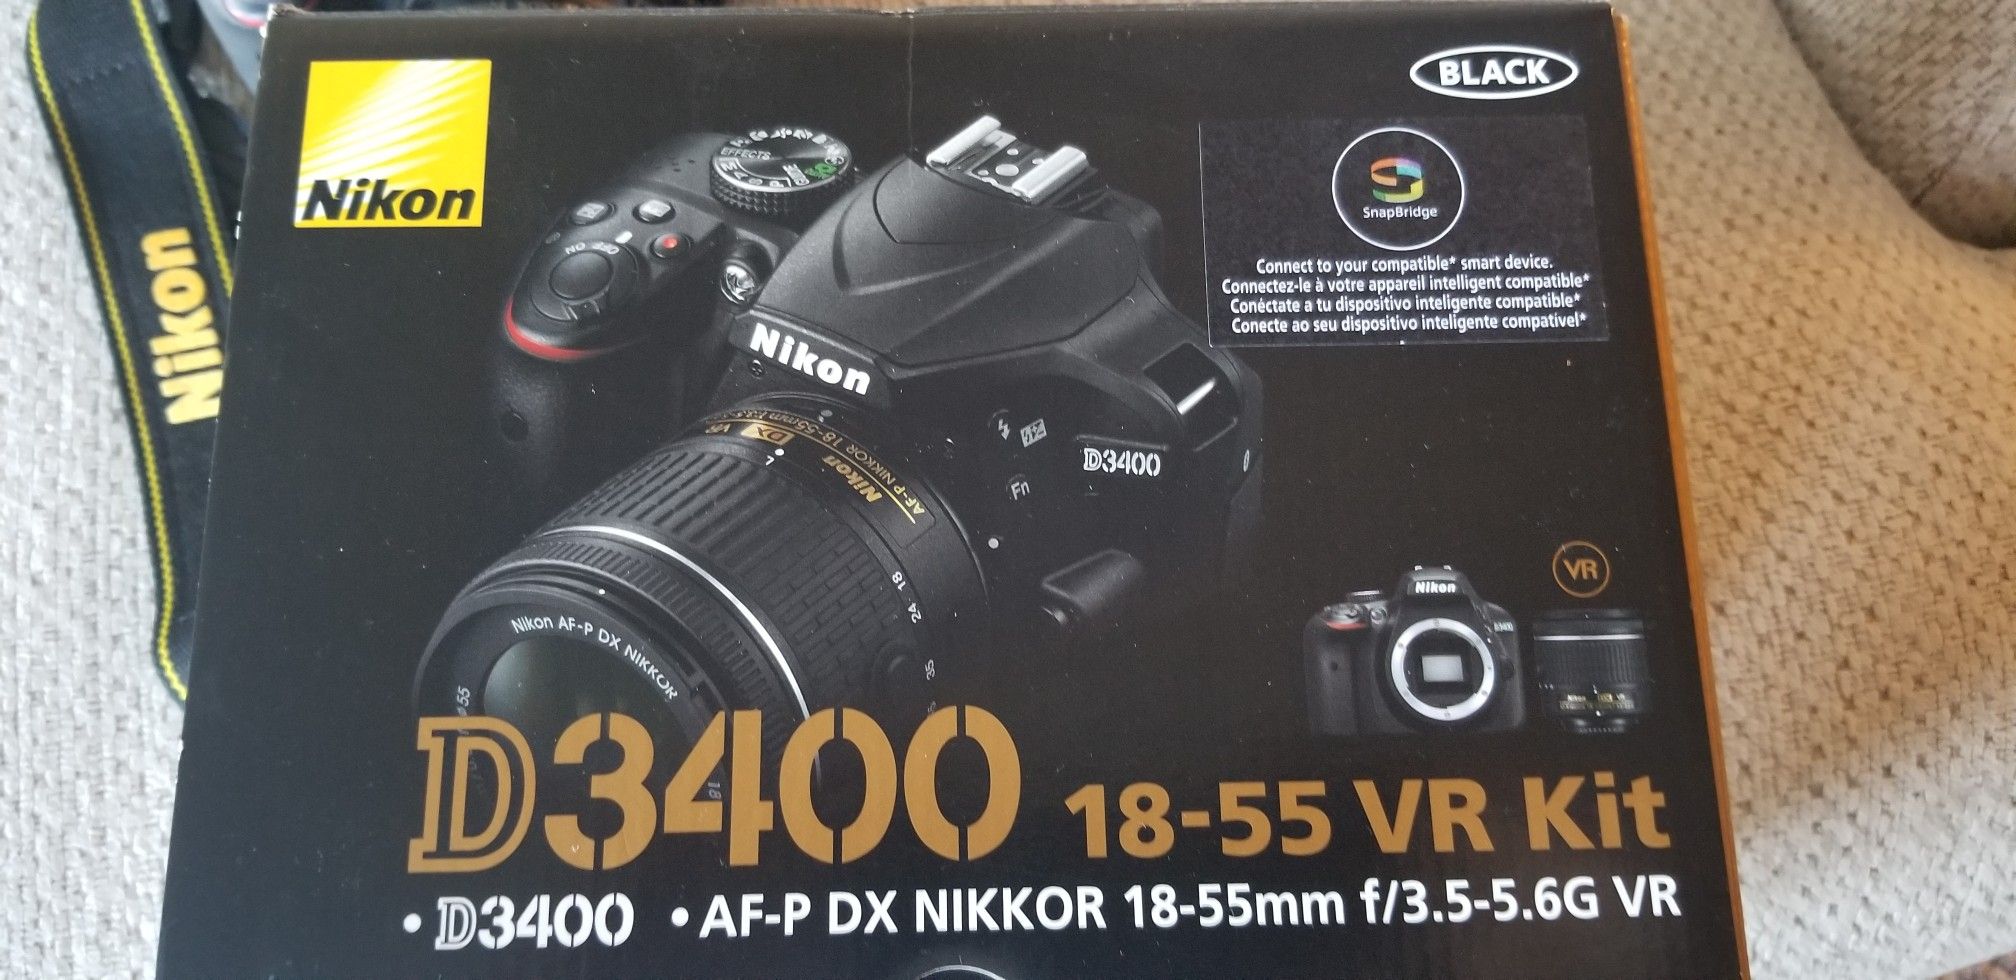 Nikon D3400 15-55 VR kit. Bought recently, lightly used by one owner. Comes with all pictured